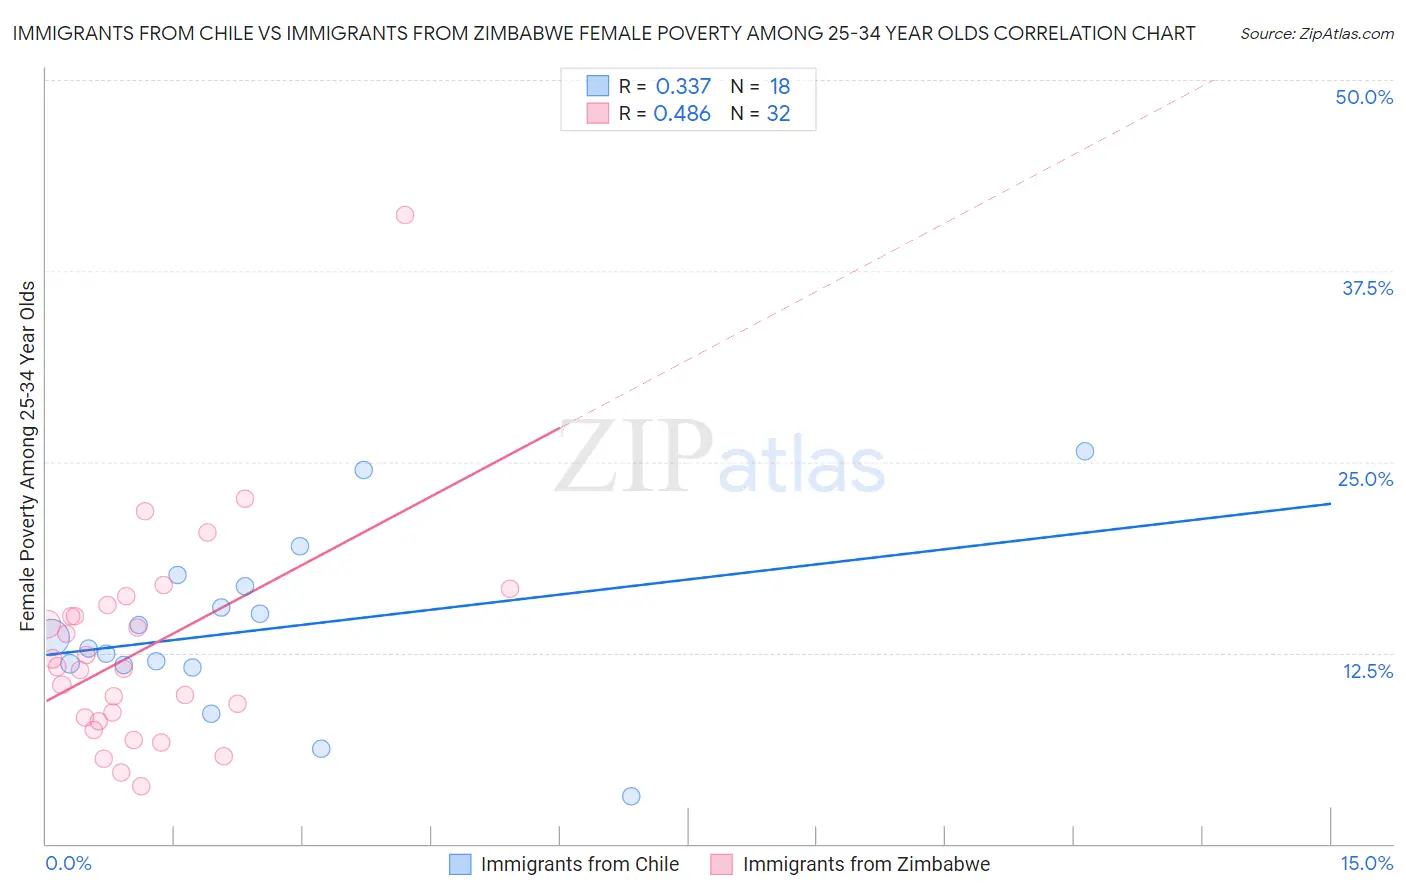 Immigrants from Chile vs Immigrants from Zimbabwe Female Poverty Among 25-34 Year Olds